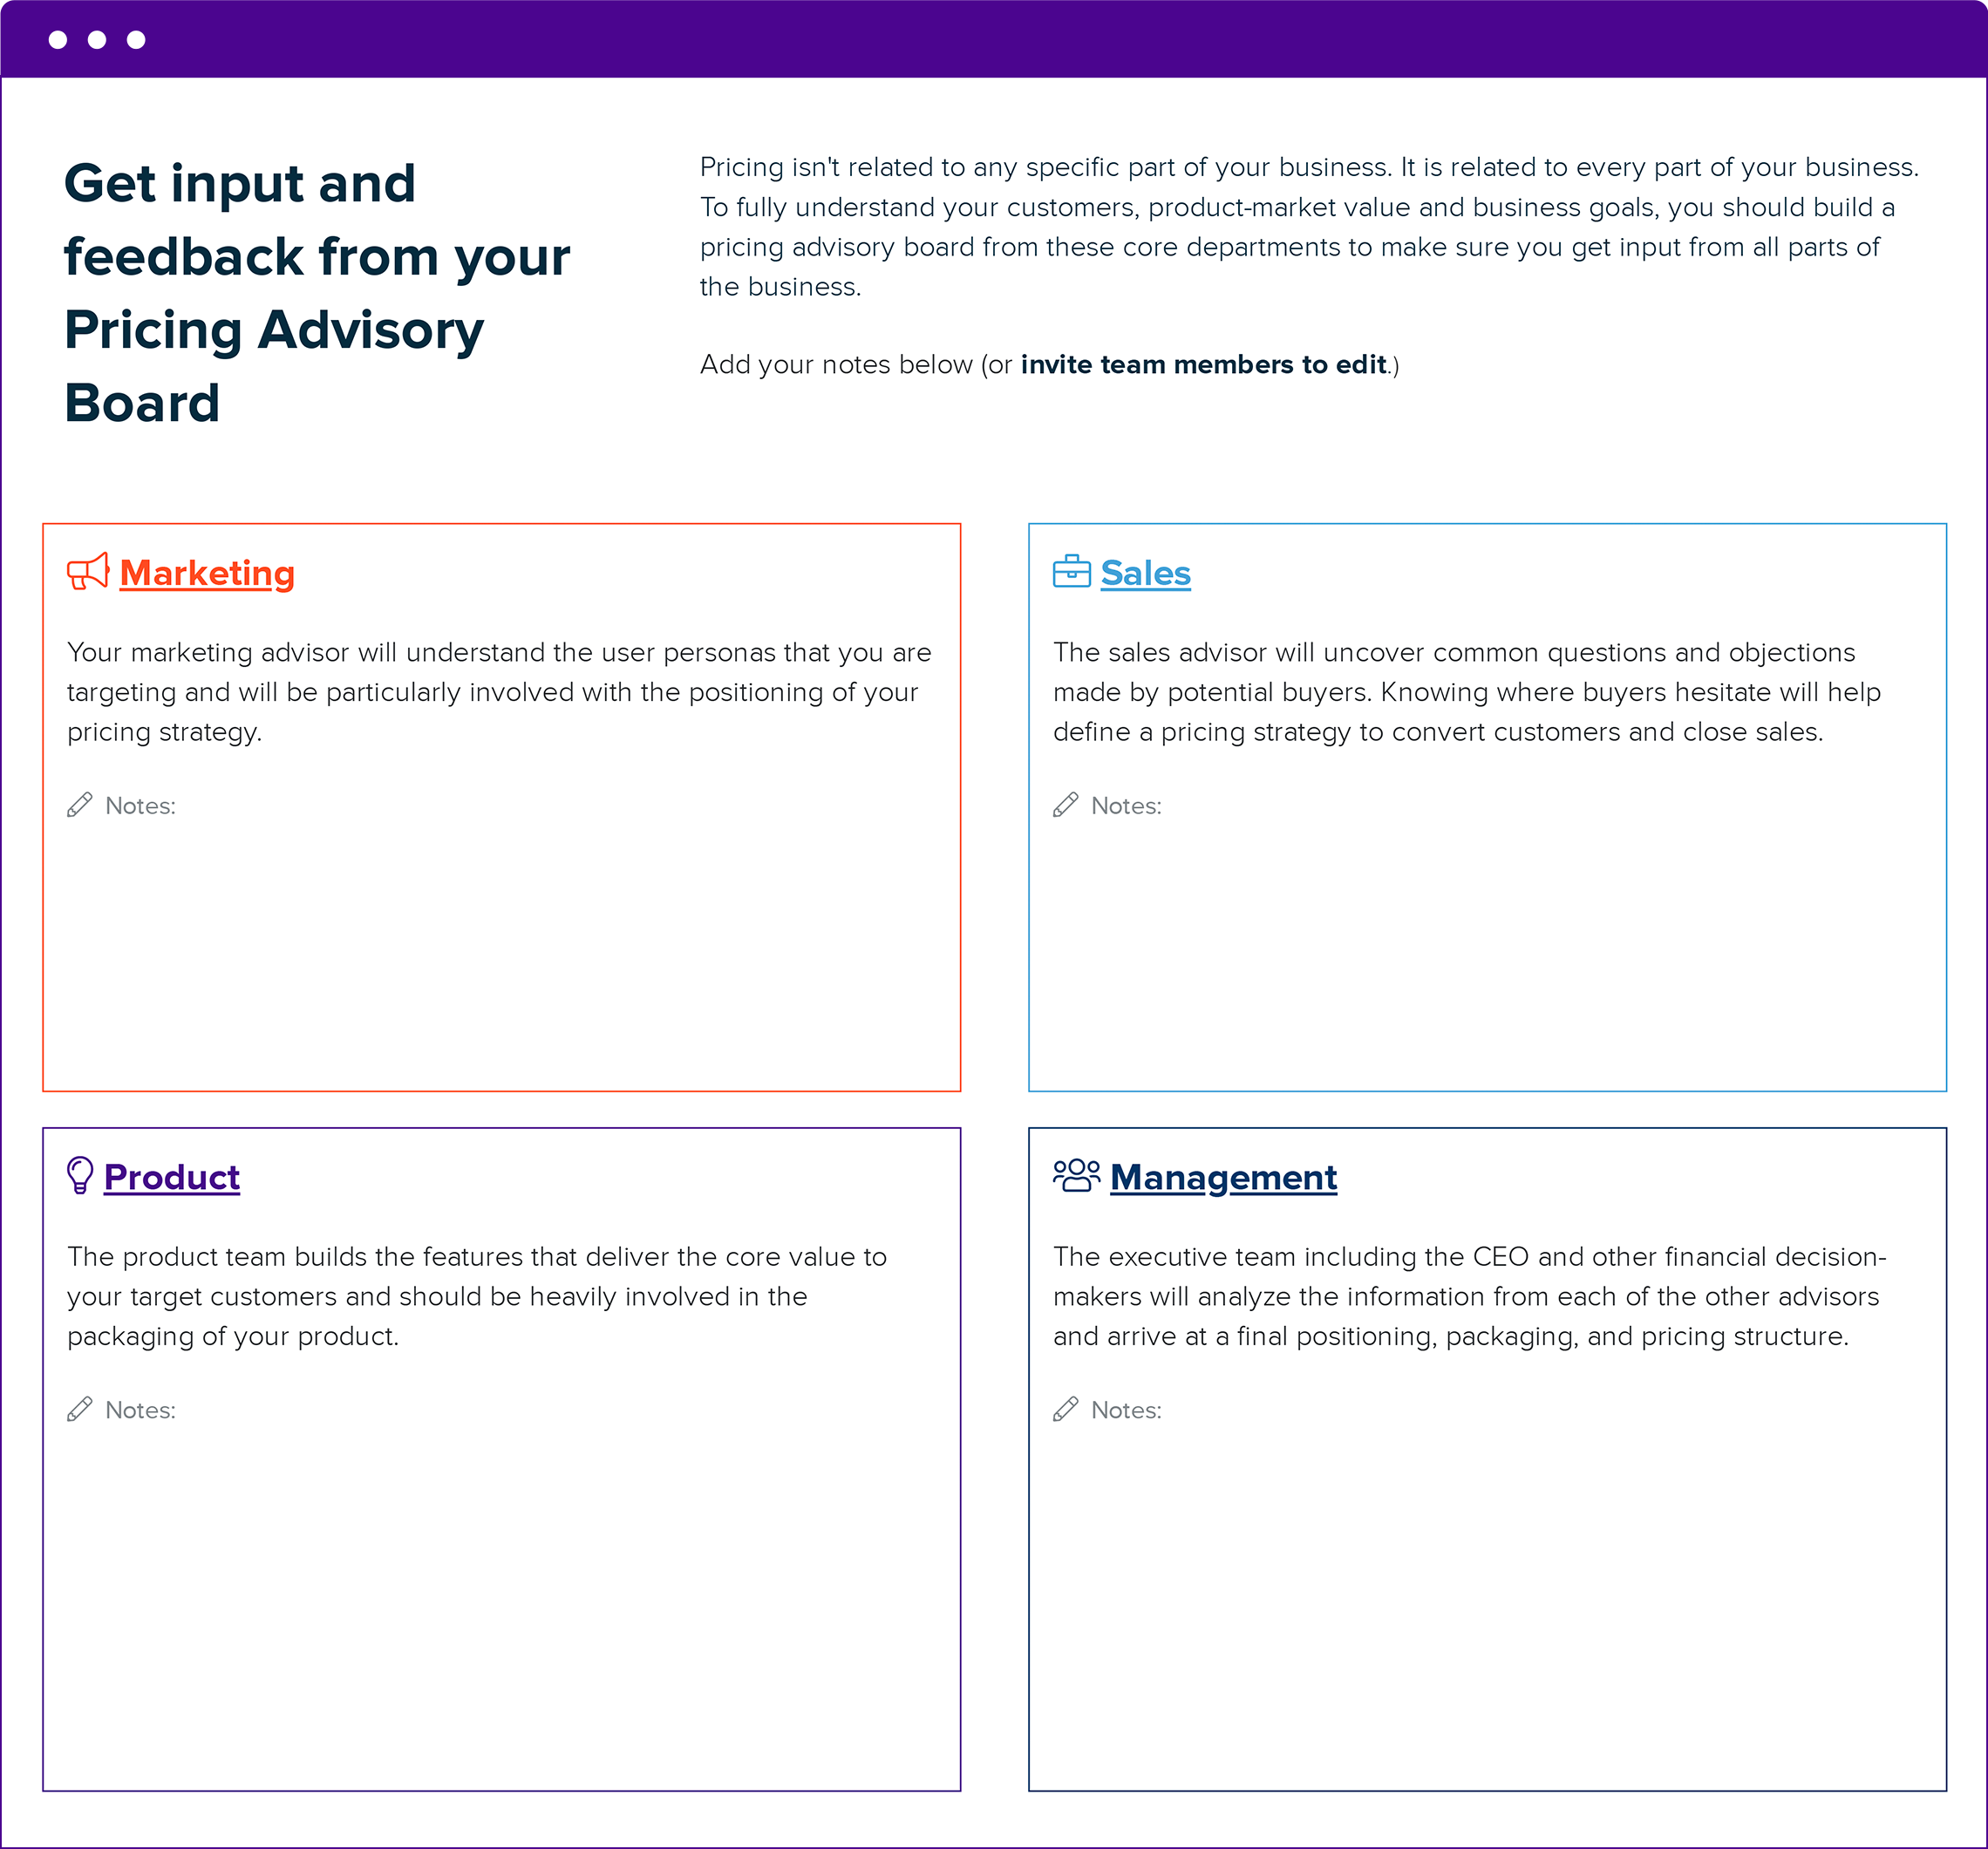 Get Input And Feedback From Your “Pricing Advisory Board